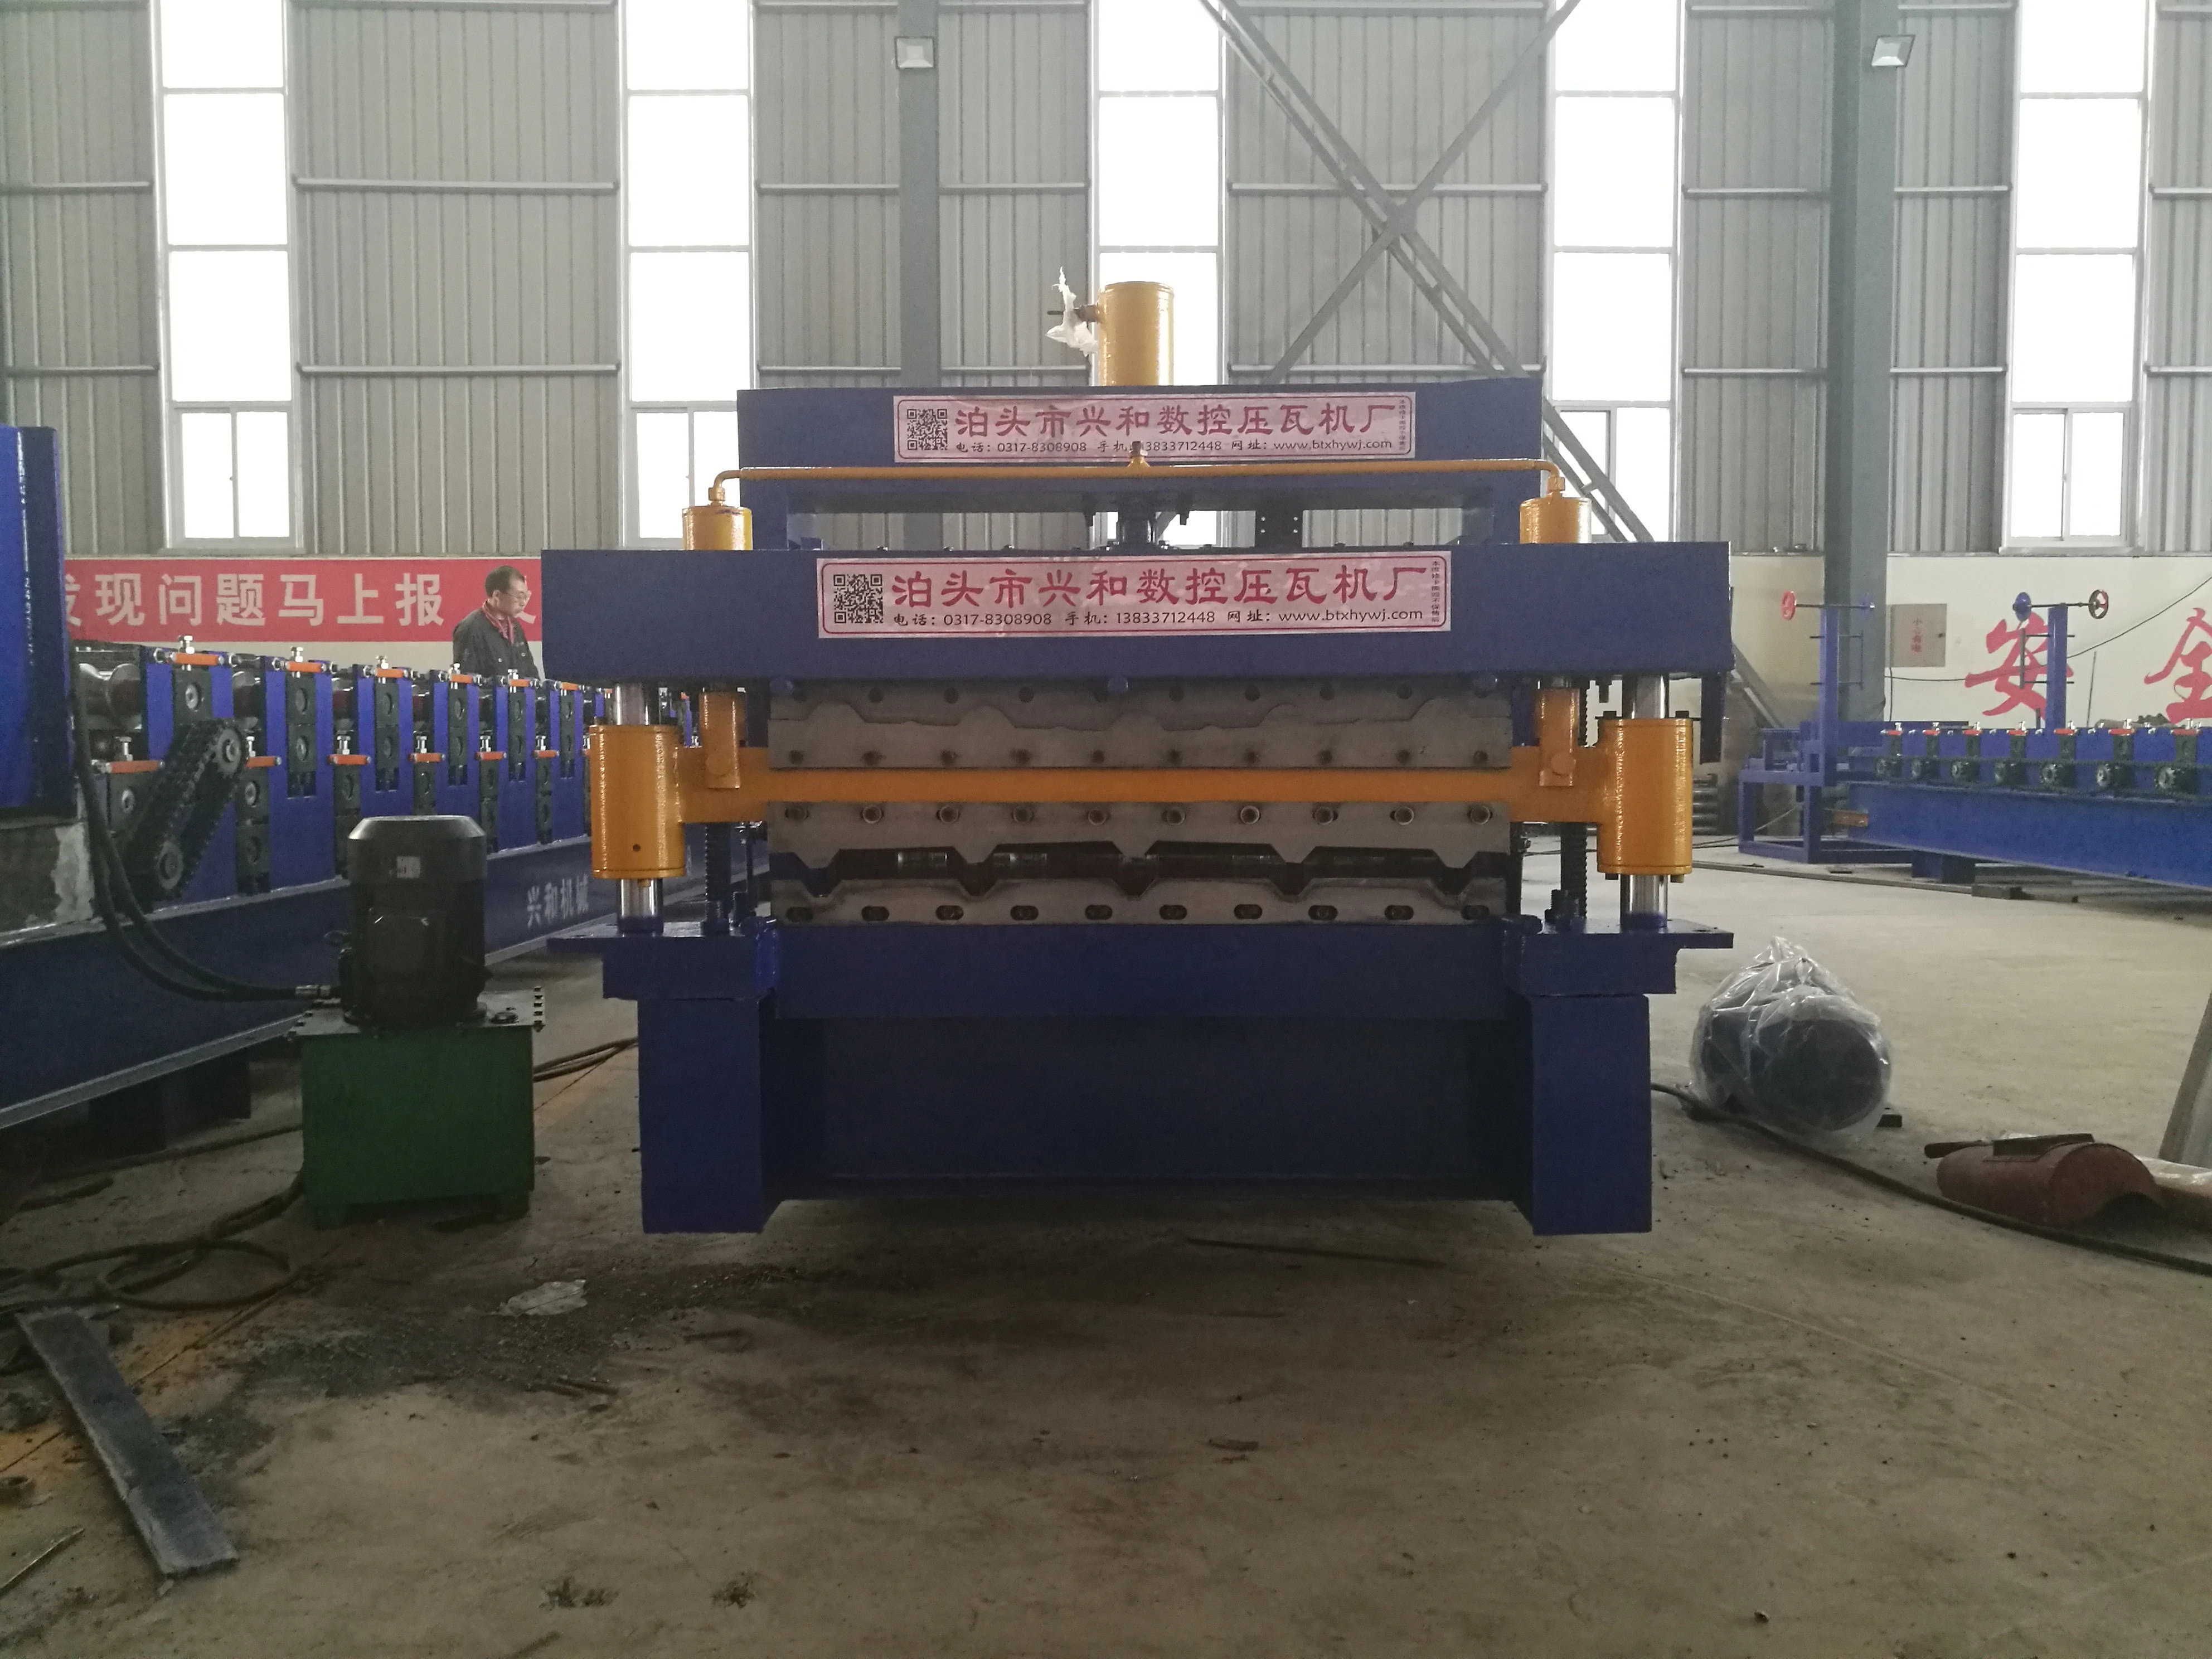 Glazed Tile Making Roll Forming Machine For Roof, Glazed Aluminum Roofing Ridge Cap Roll Forming Machine